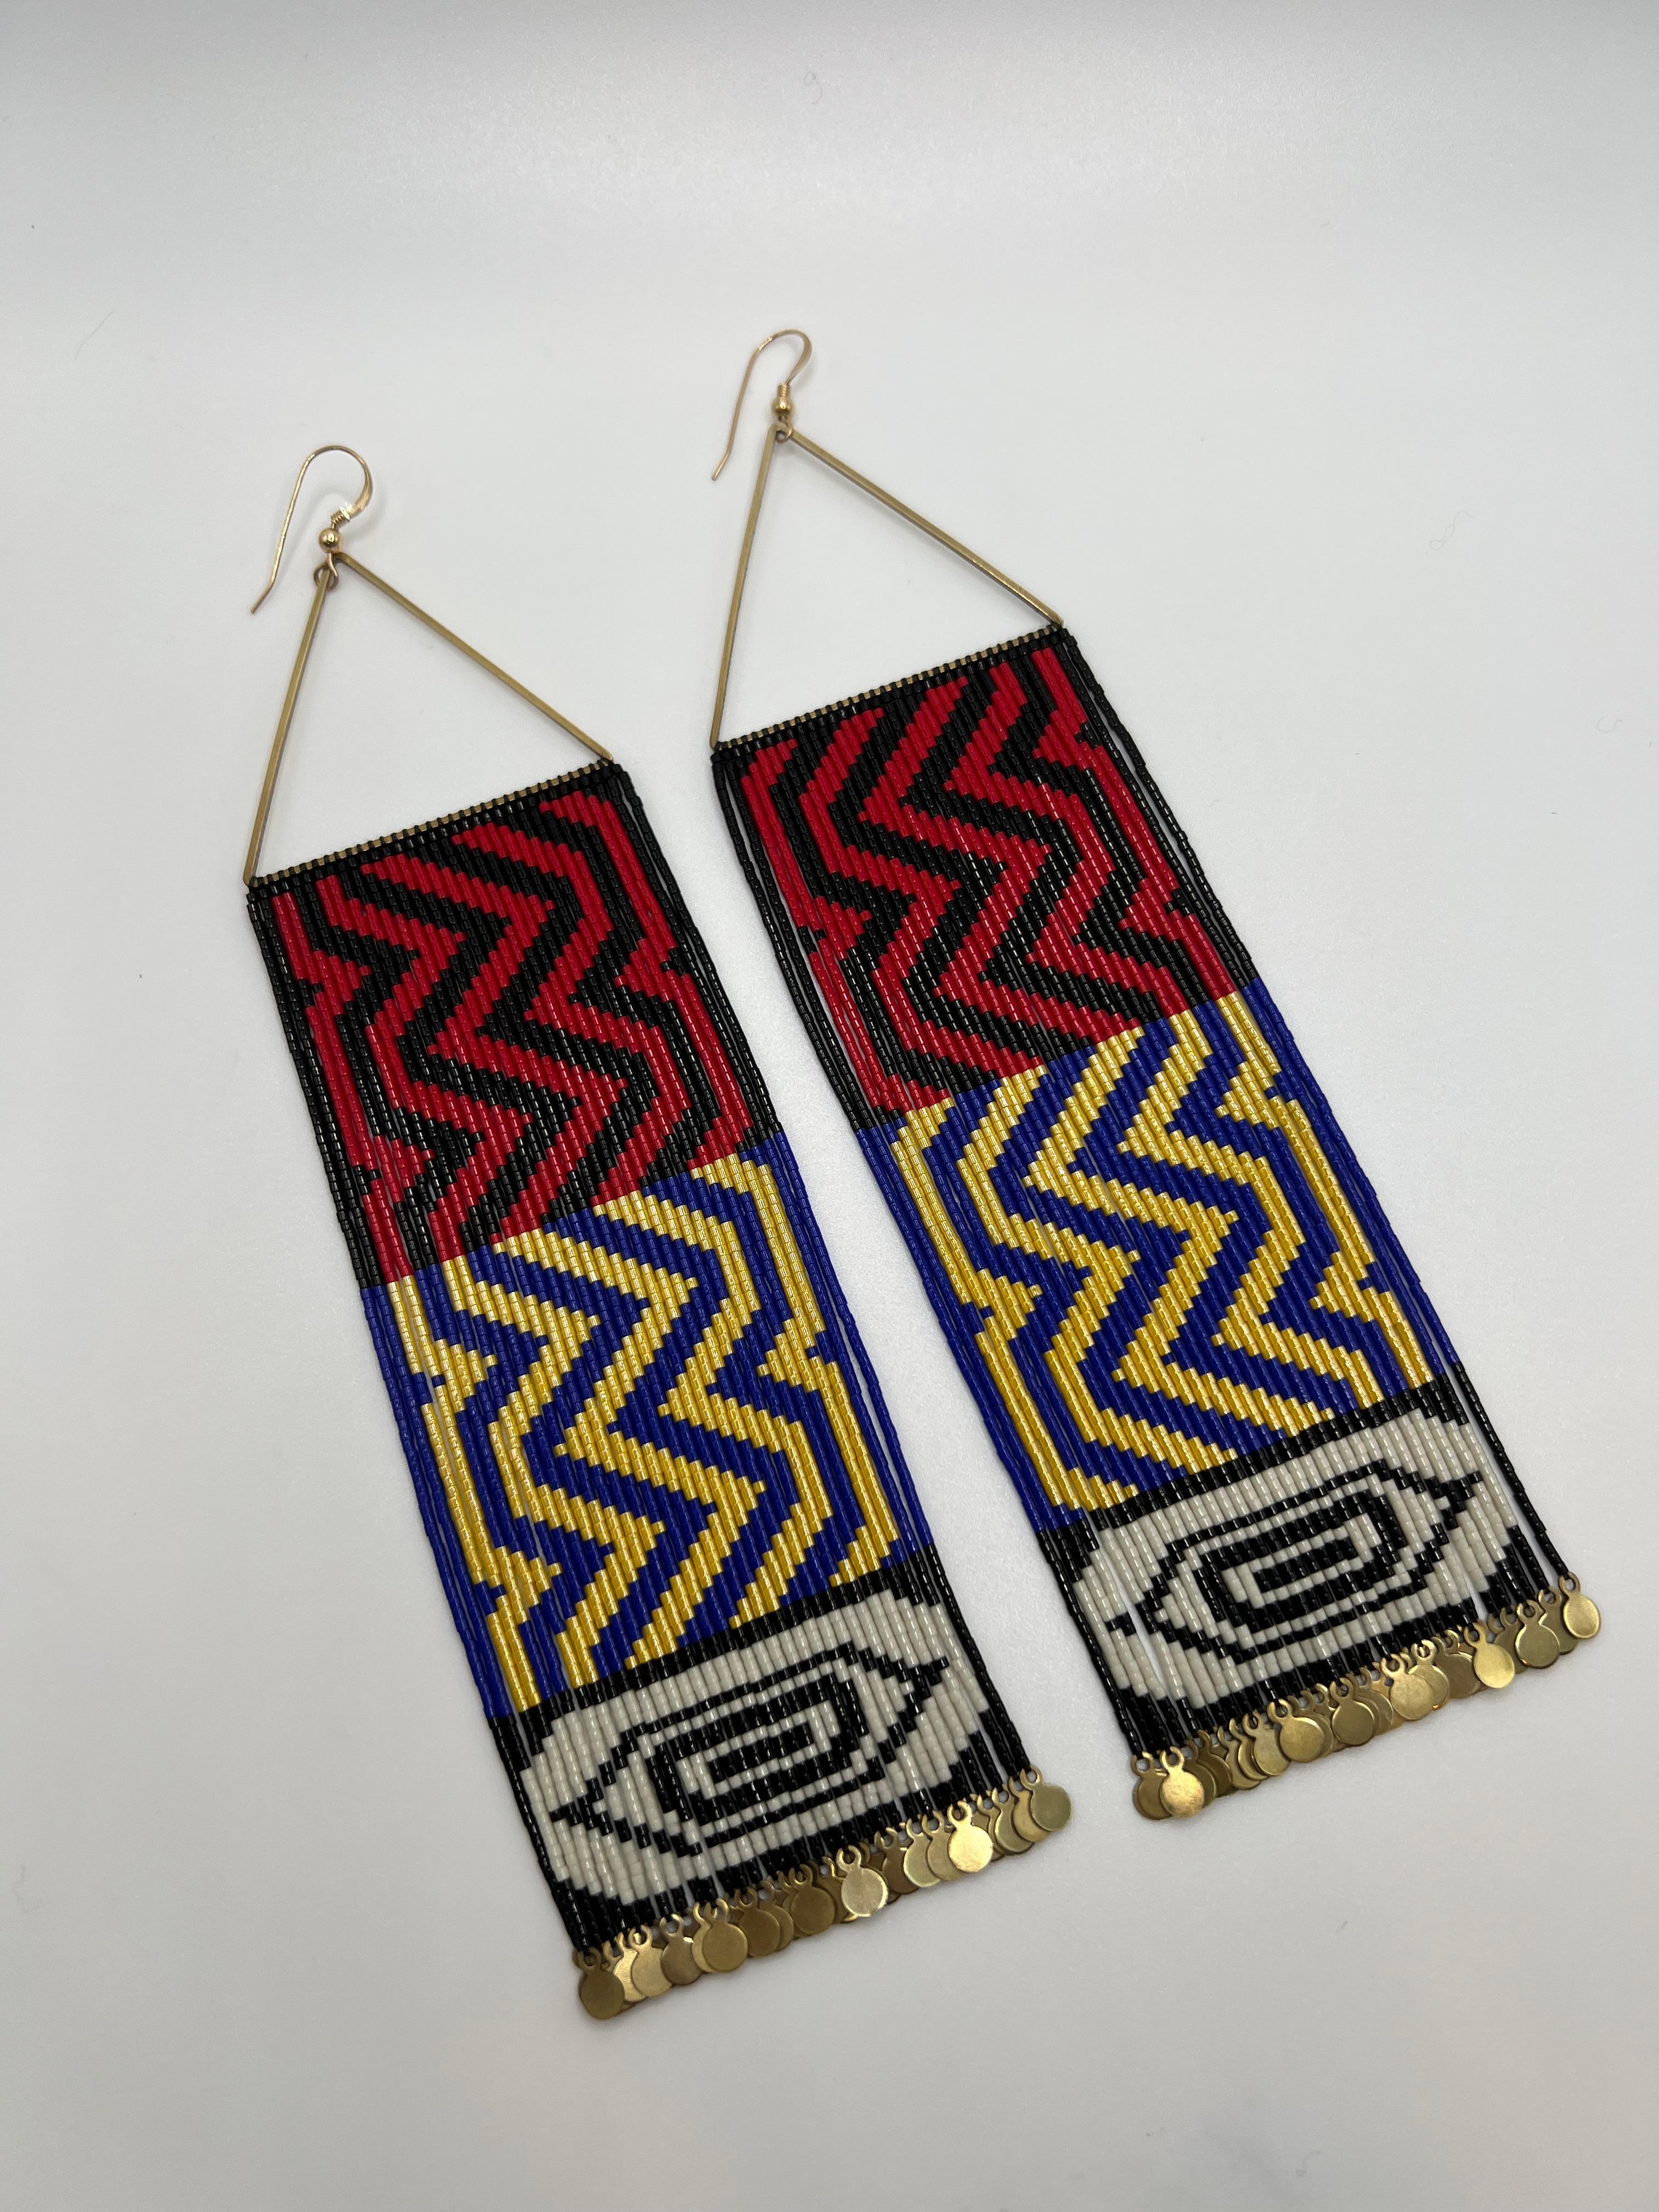 These earrings are extra long, featuring the iconic ‘All my Ancestors’ Raven’s Tail design. They also have a formline eye designed in  Naaxiin style at the bottom of the fringe. Naaxiin, also known as Chilkat weaving is a complex textile that